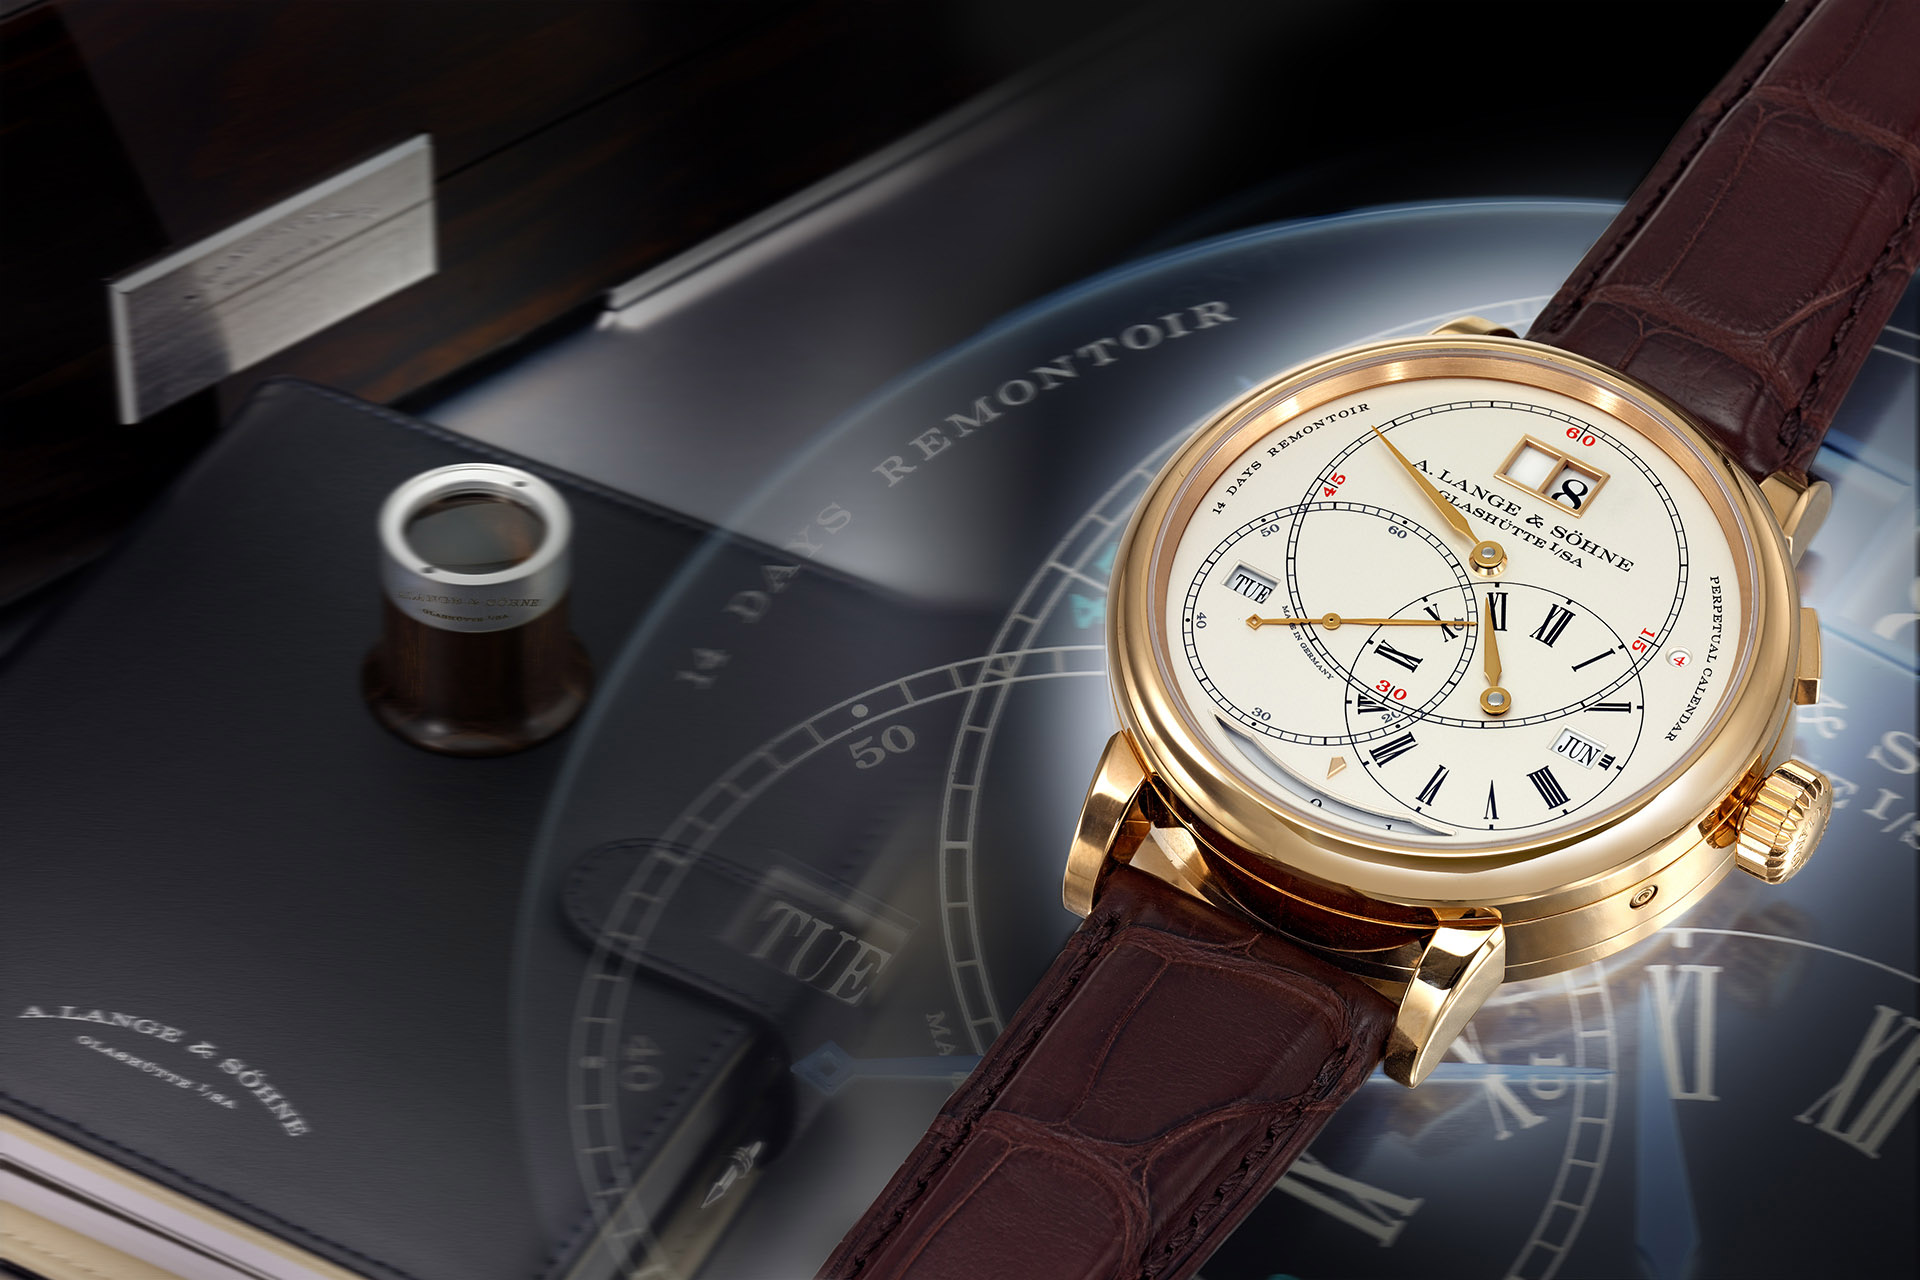 Watch Photography - A. Lange & Sohne Gold Wristwatch